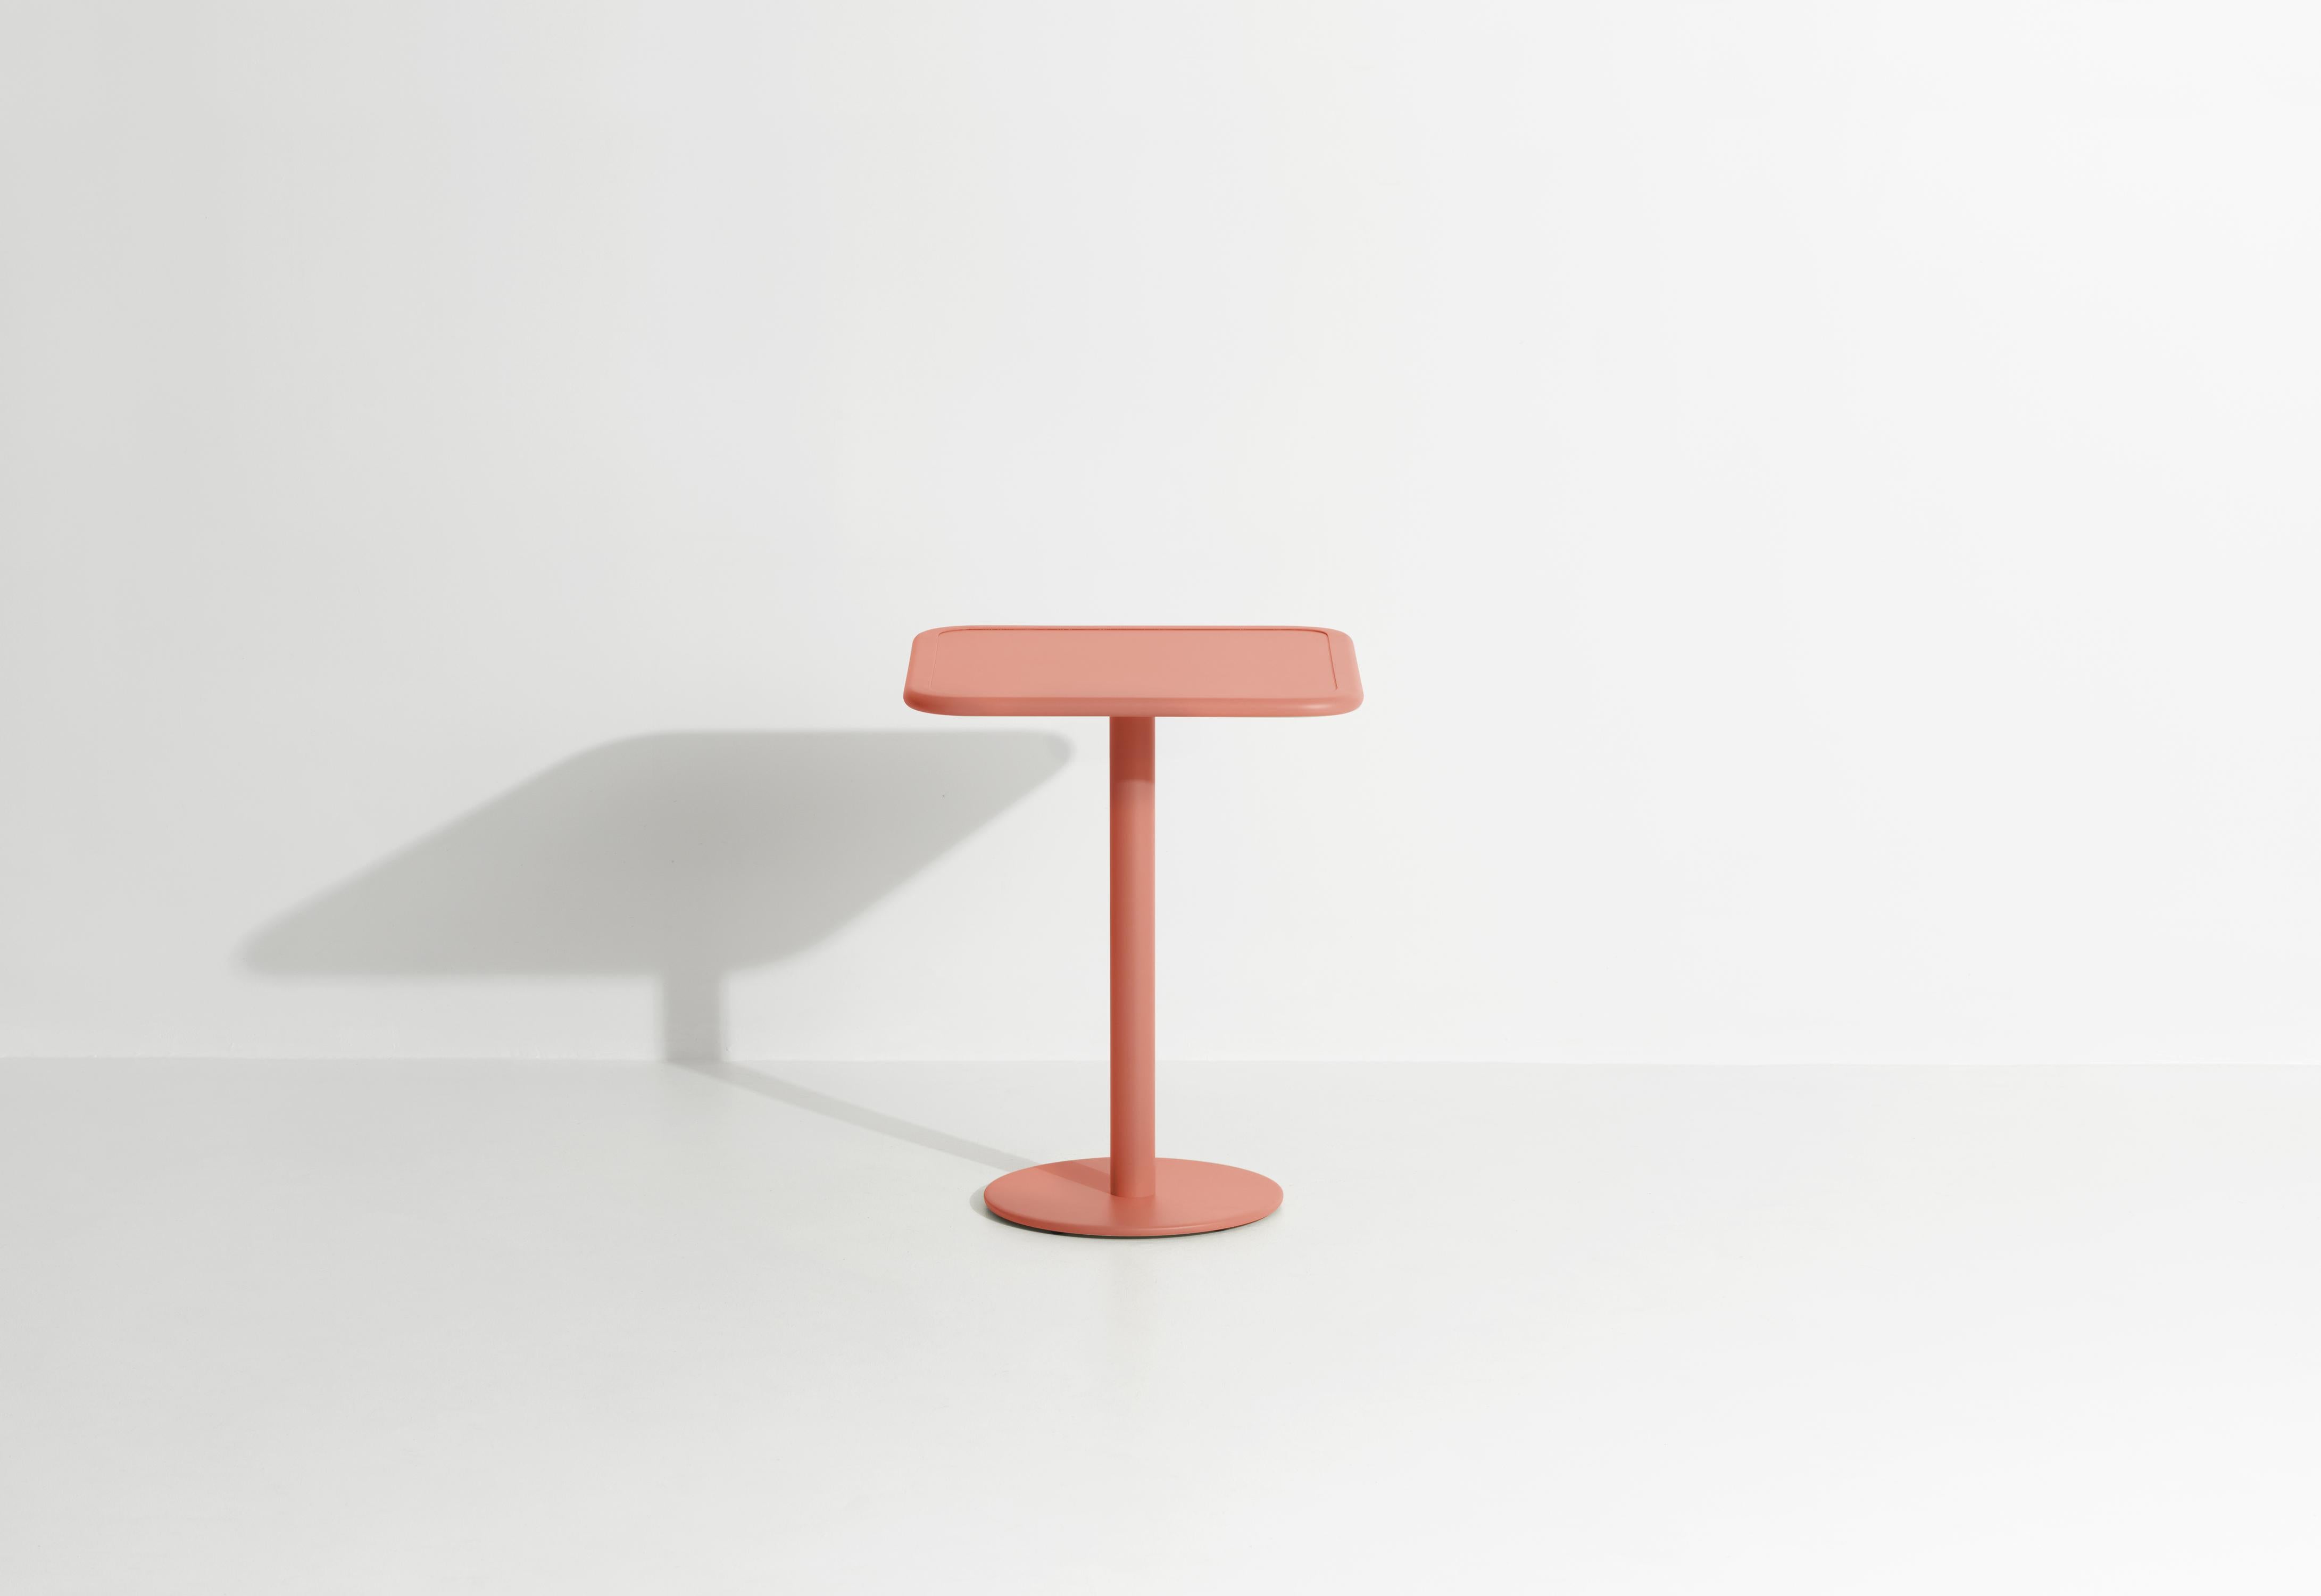 Petite Friture Week-End Bistro Square Dining Table in Coral Aluminium by Studio BrichetZiegler, 2017

The week-end collection is a full range of outdoor furniture, in aluminium grained epoxy paint, matt finish, that includes 18 functions and 8